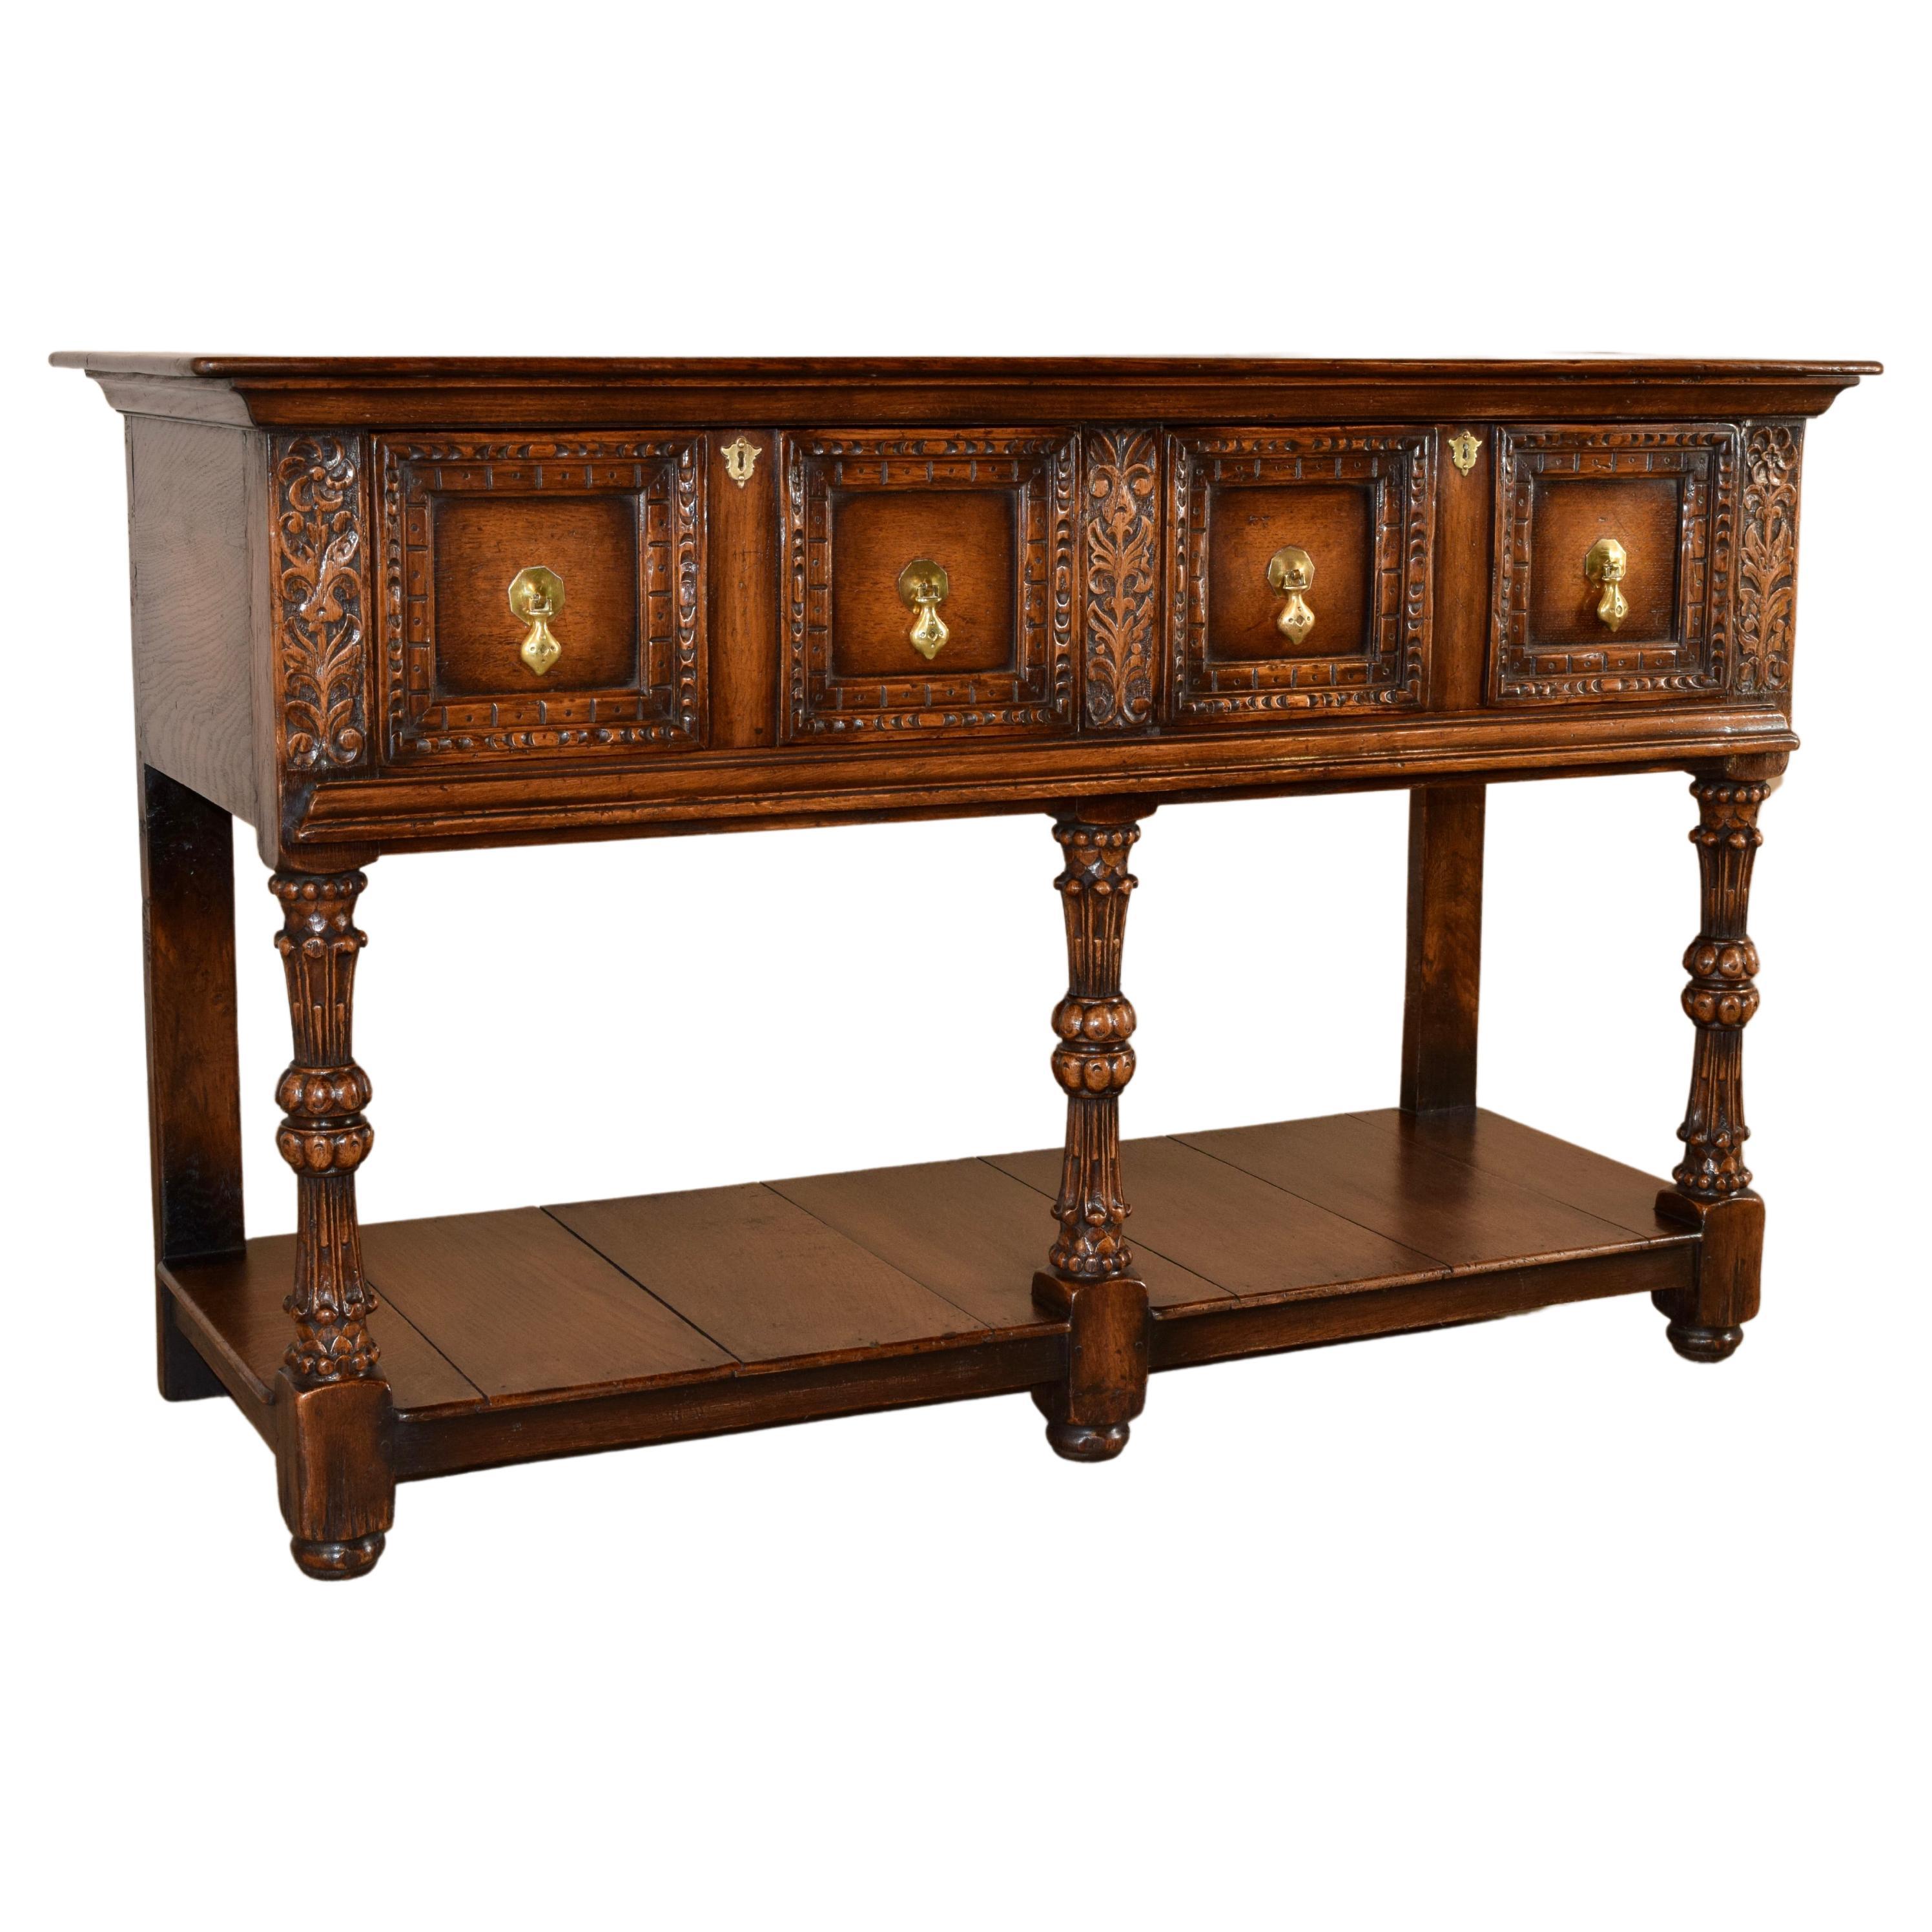 19th Century English Paneled Sideboard For Sale